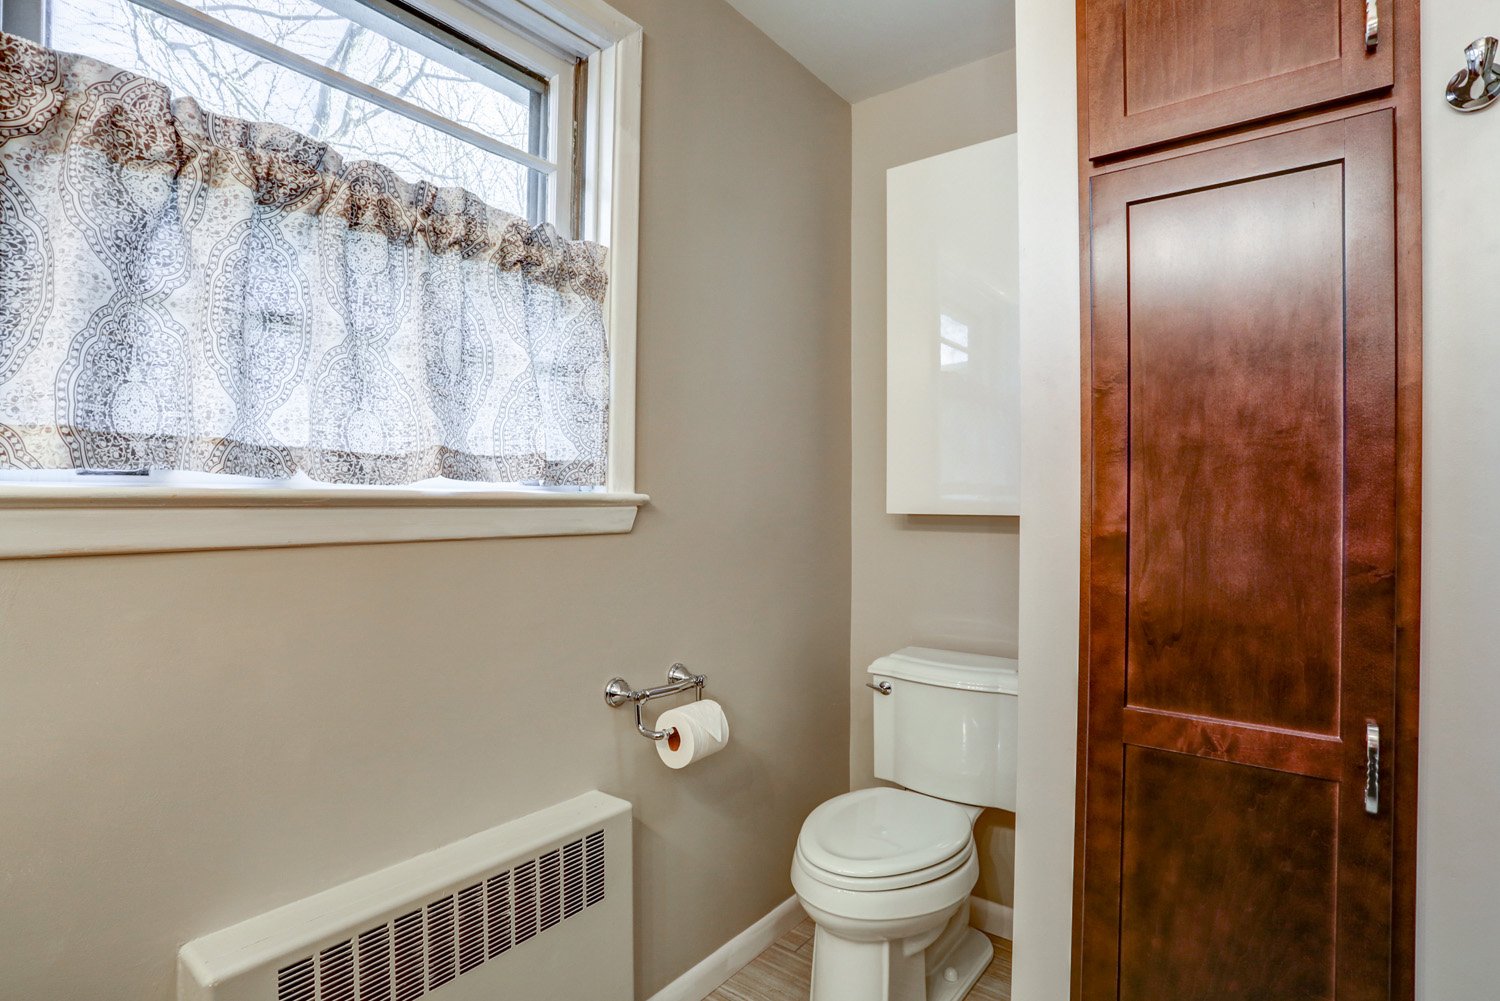 Manheim Township Bathroom Remodel with added storage cabinets